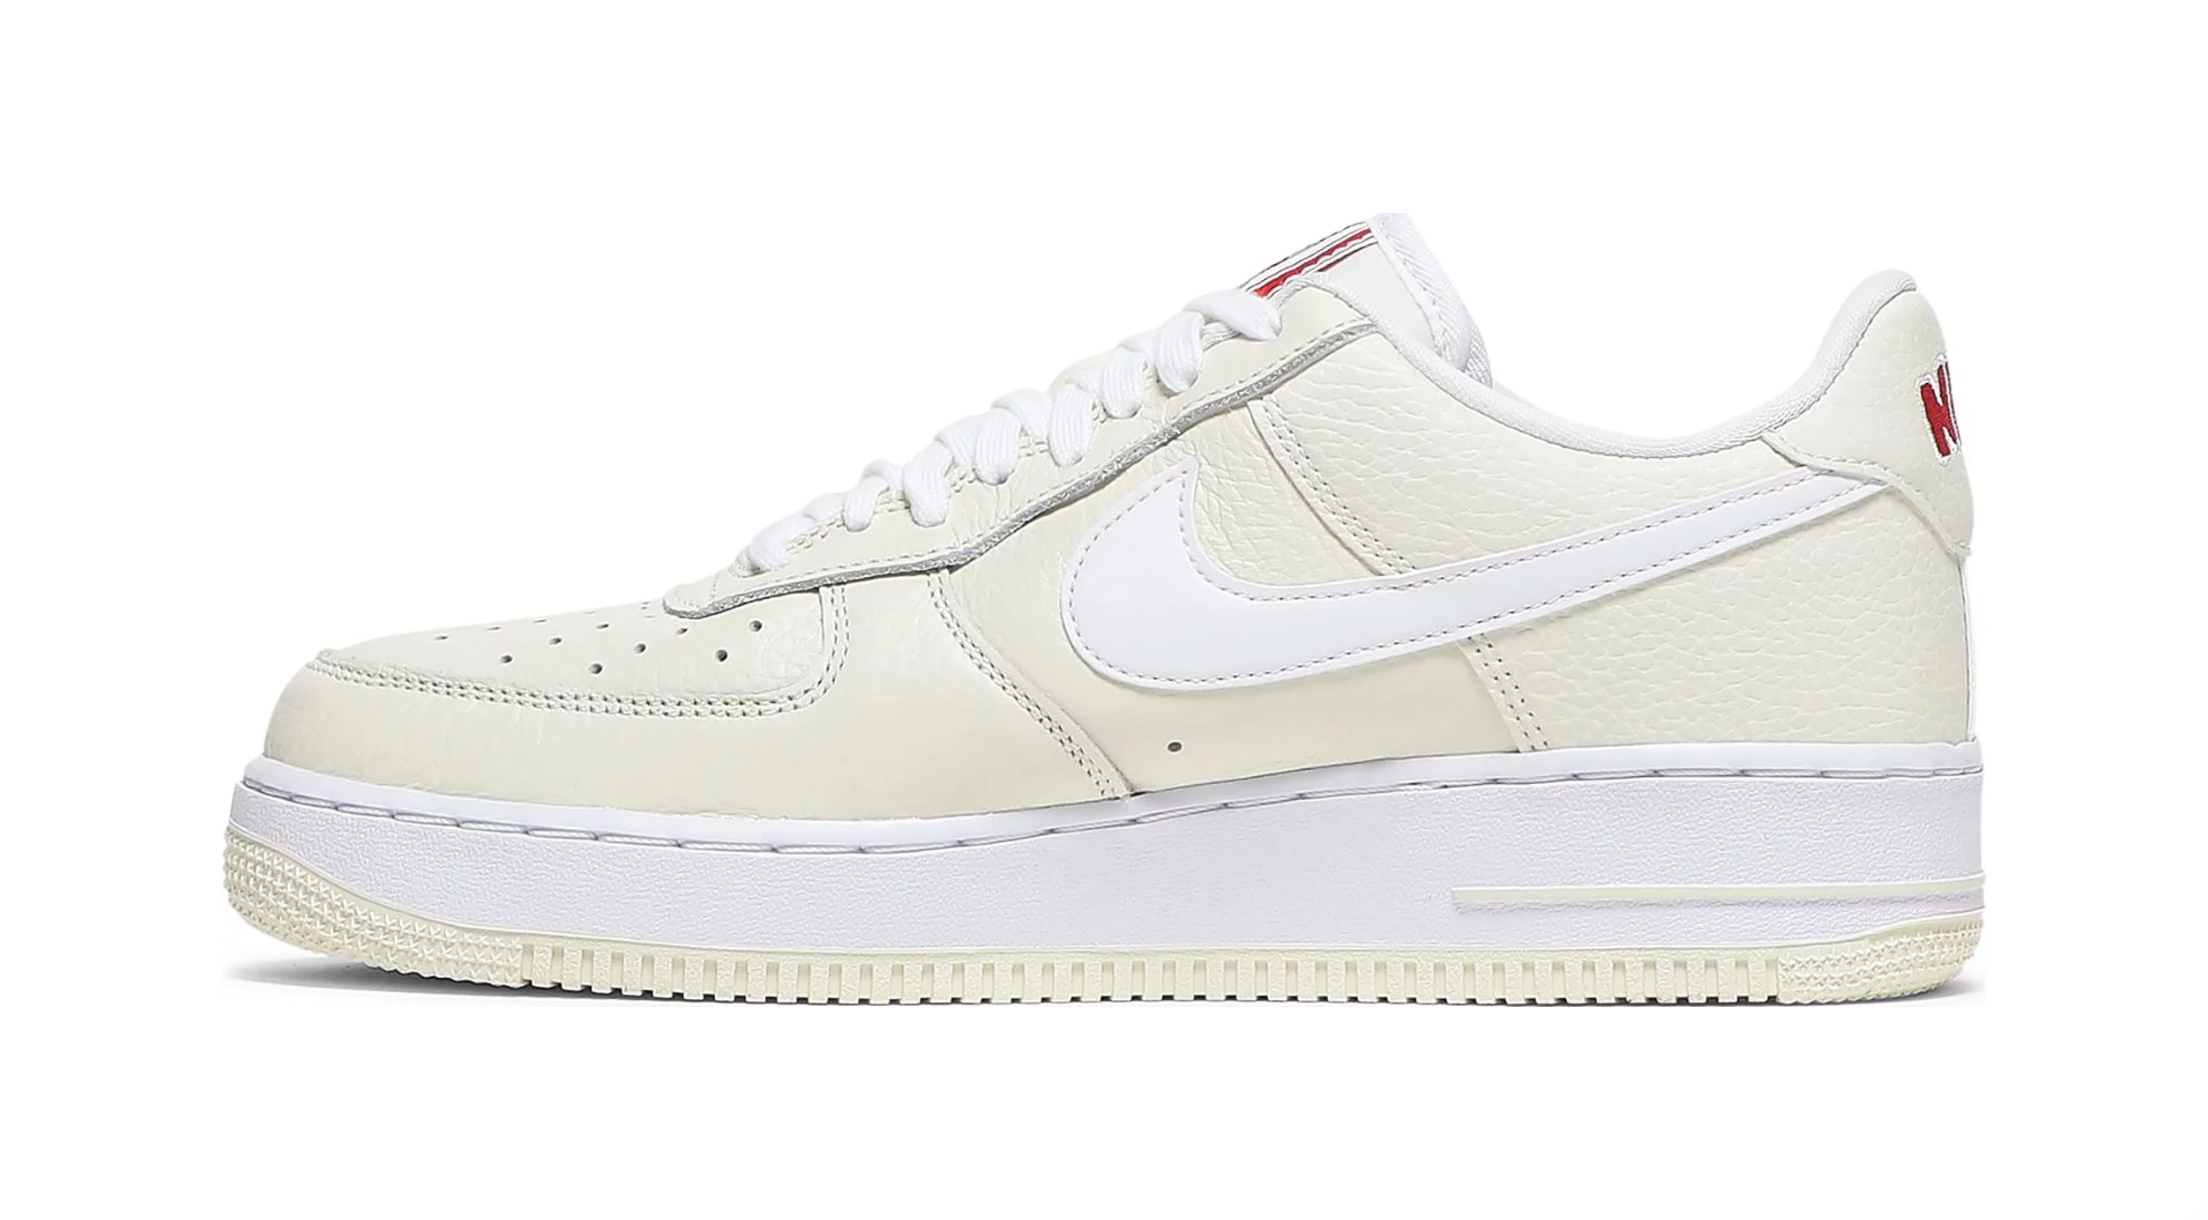 Air Force 1 Laces - Nike Air Force 1 Low Stussy Fossil White / 160cm